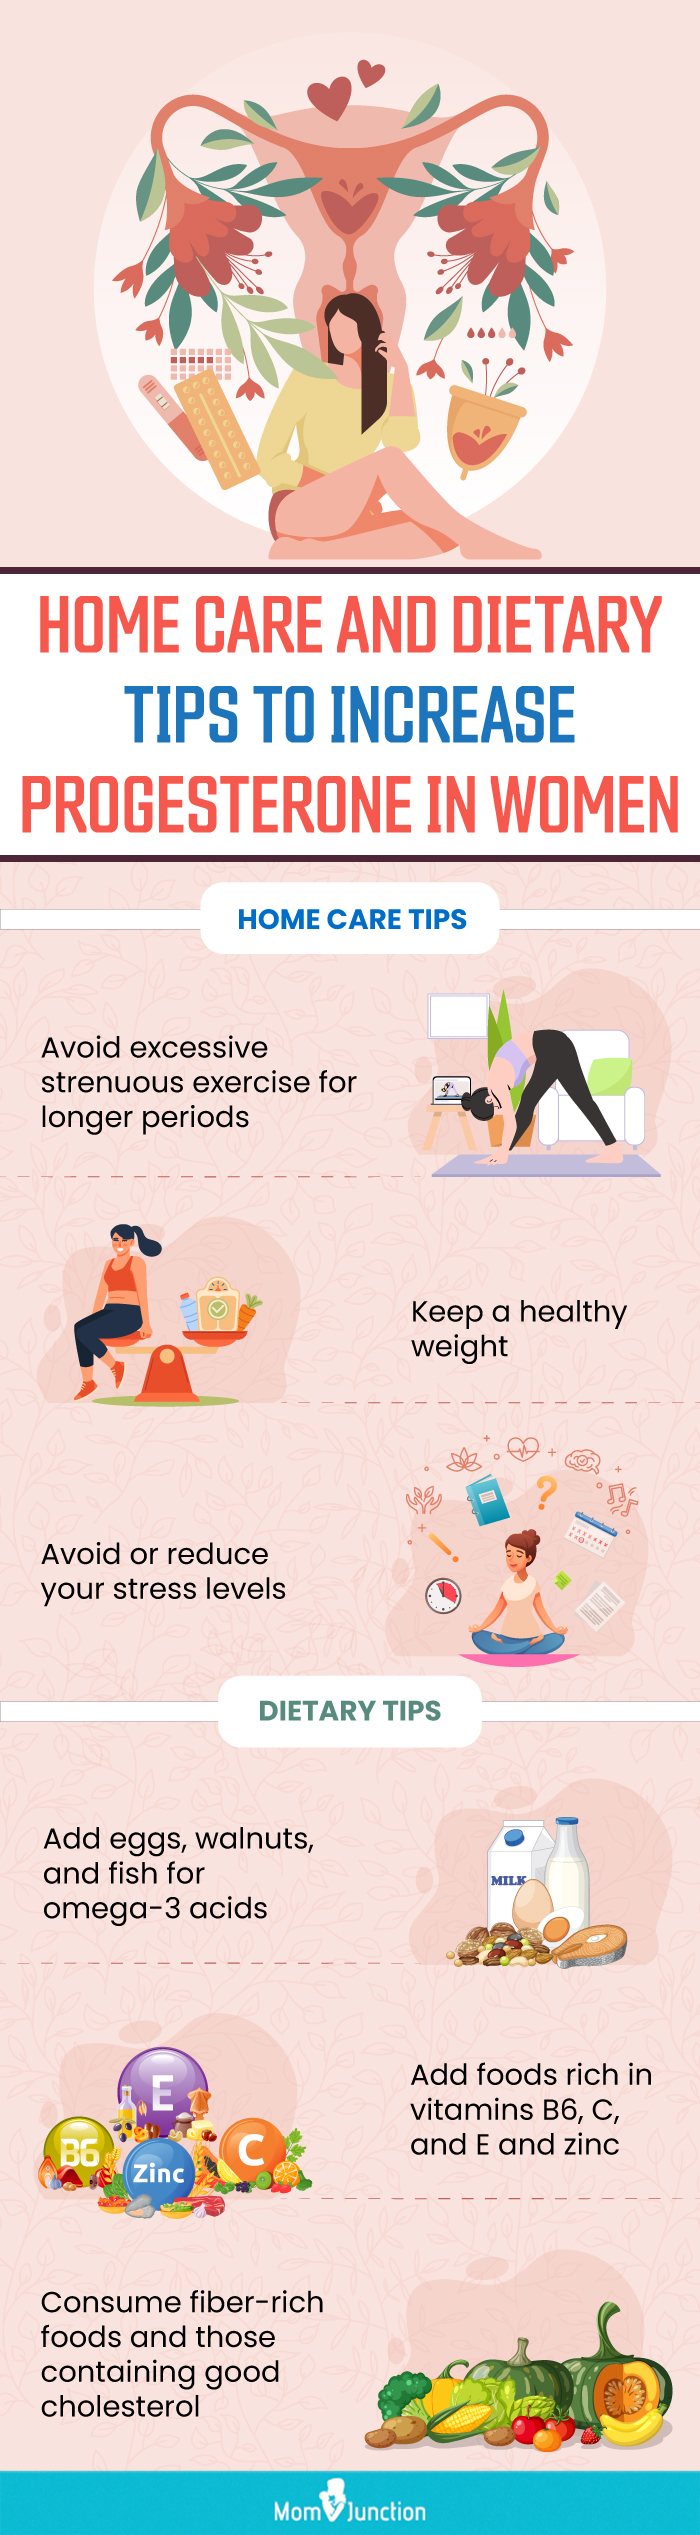 home care and dietary tips to increase progesterone in women (infographic)